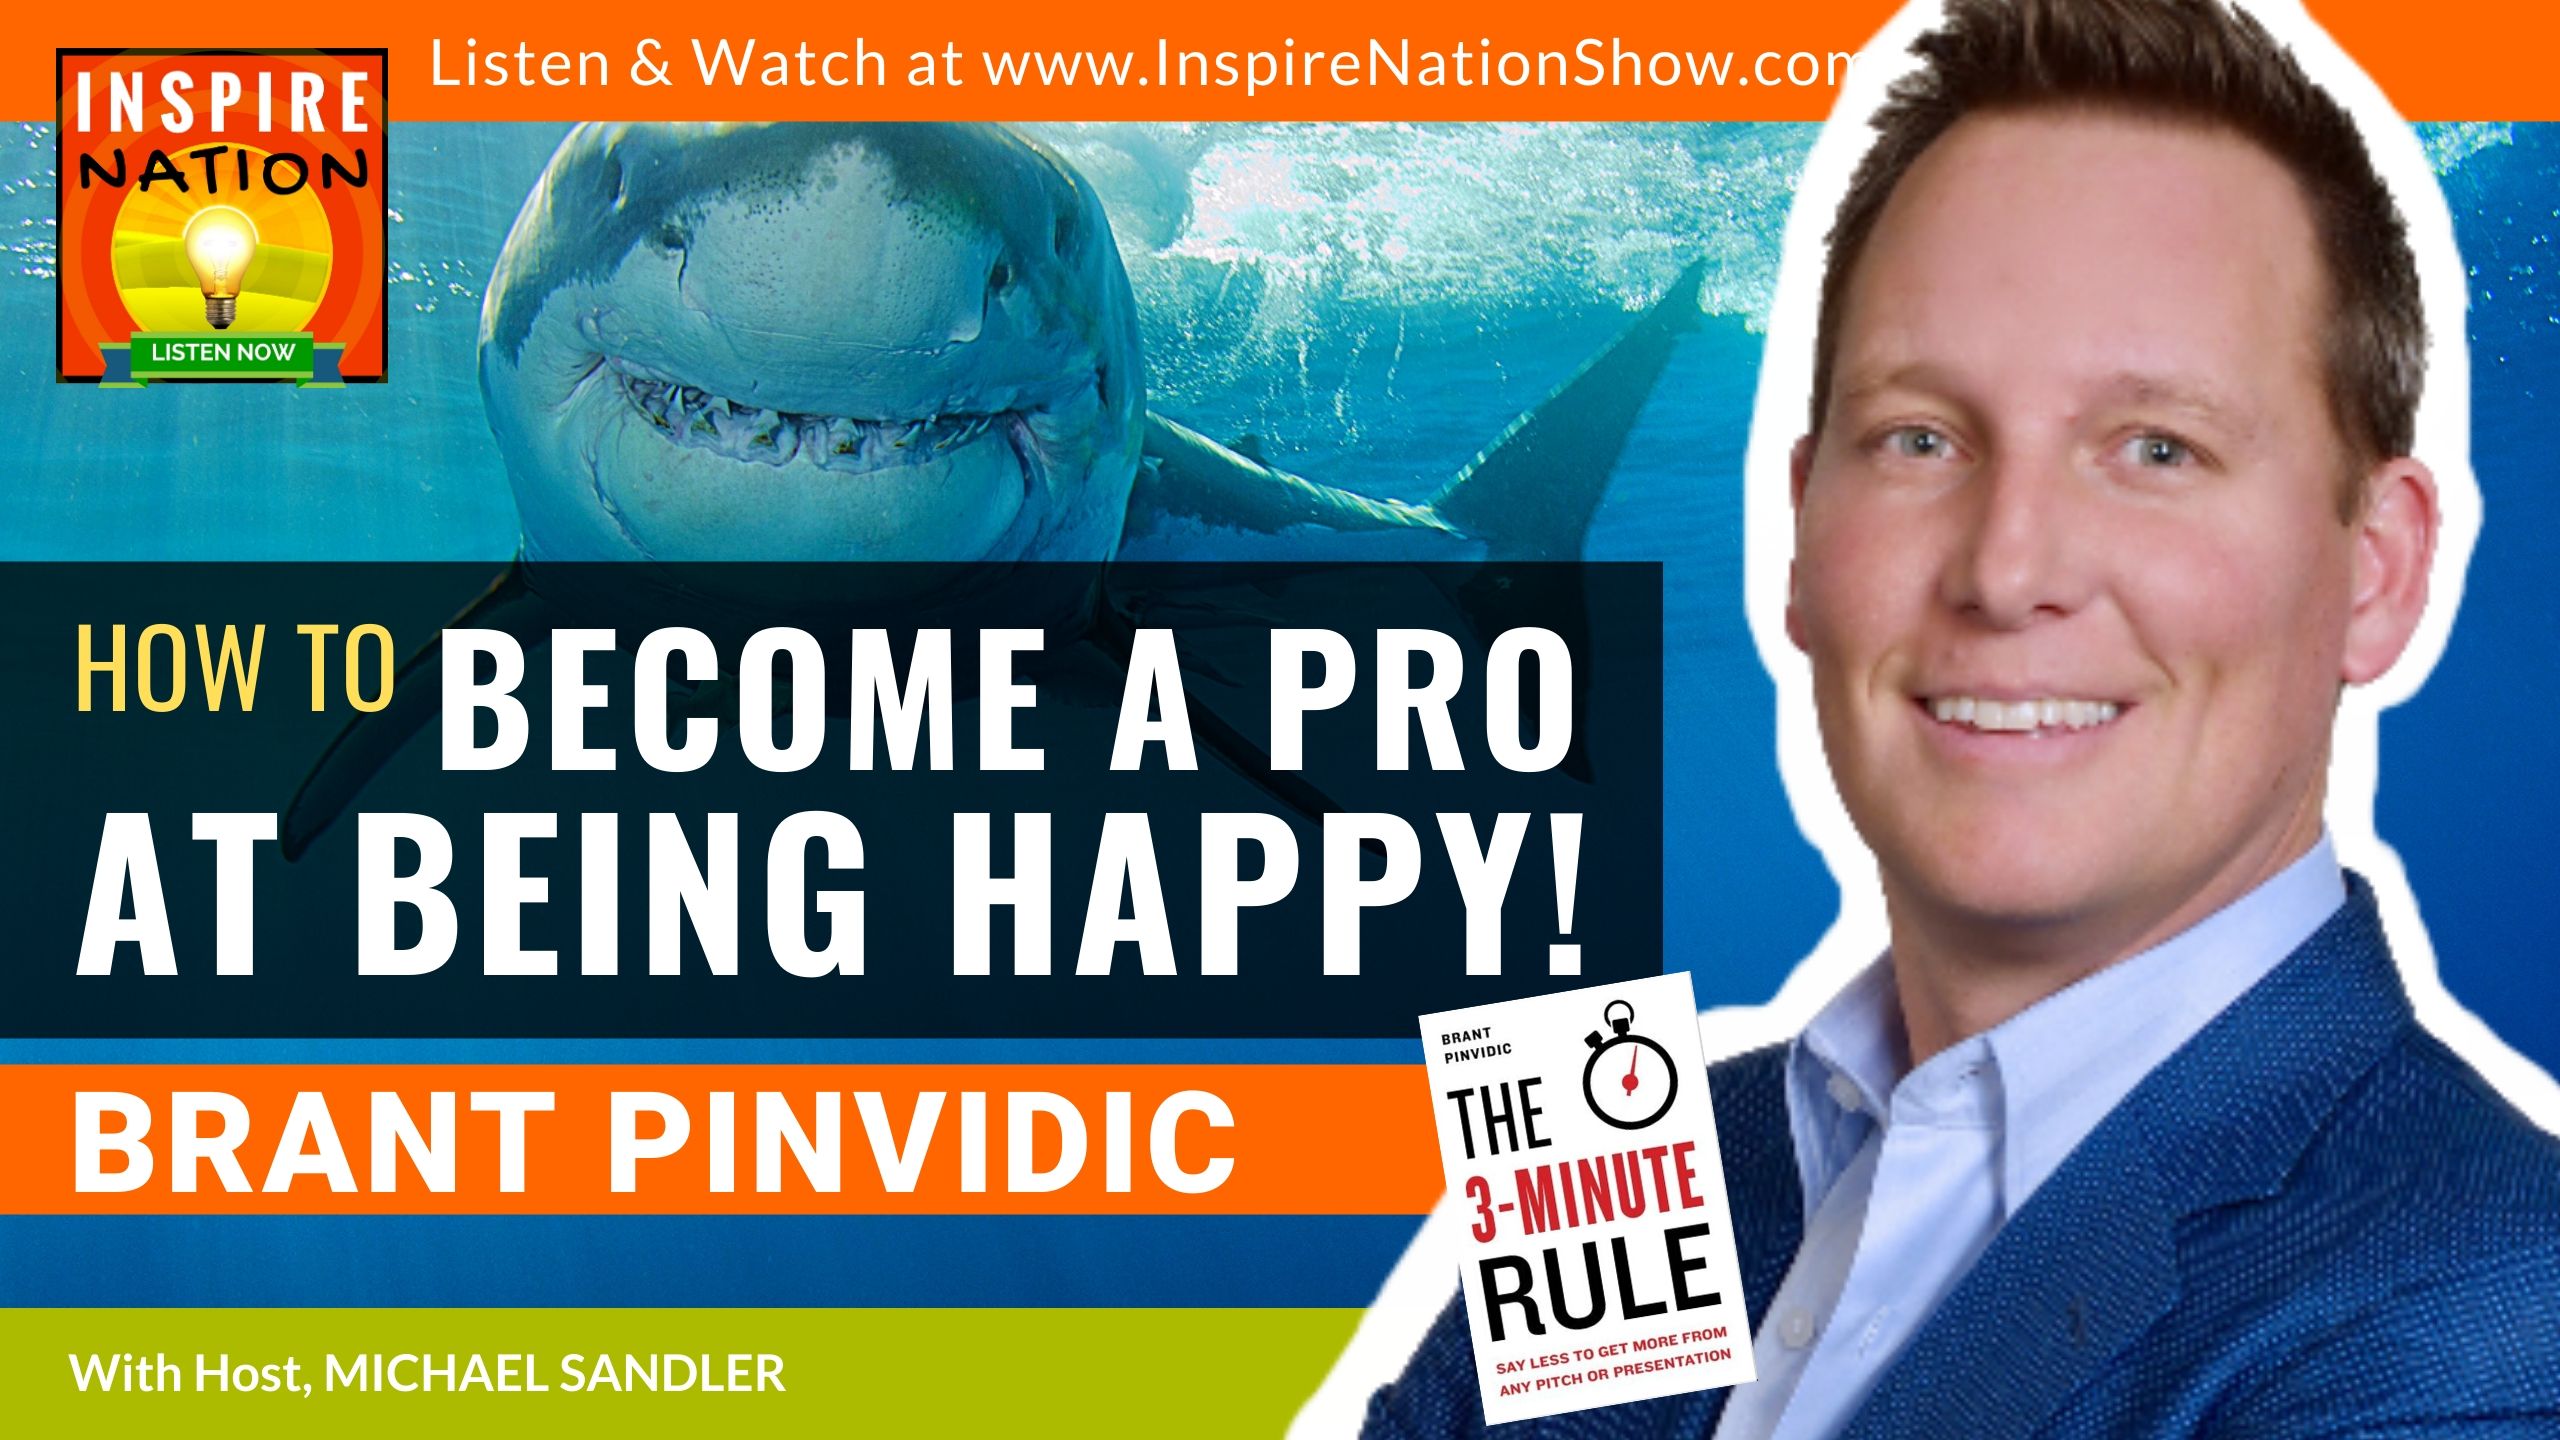 Michael Sandler interviews Brant Pinvidic on how to become a pro at being happy!